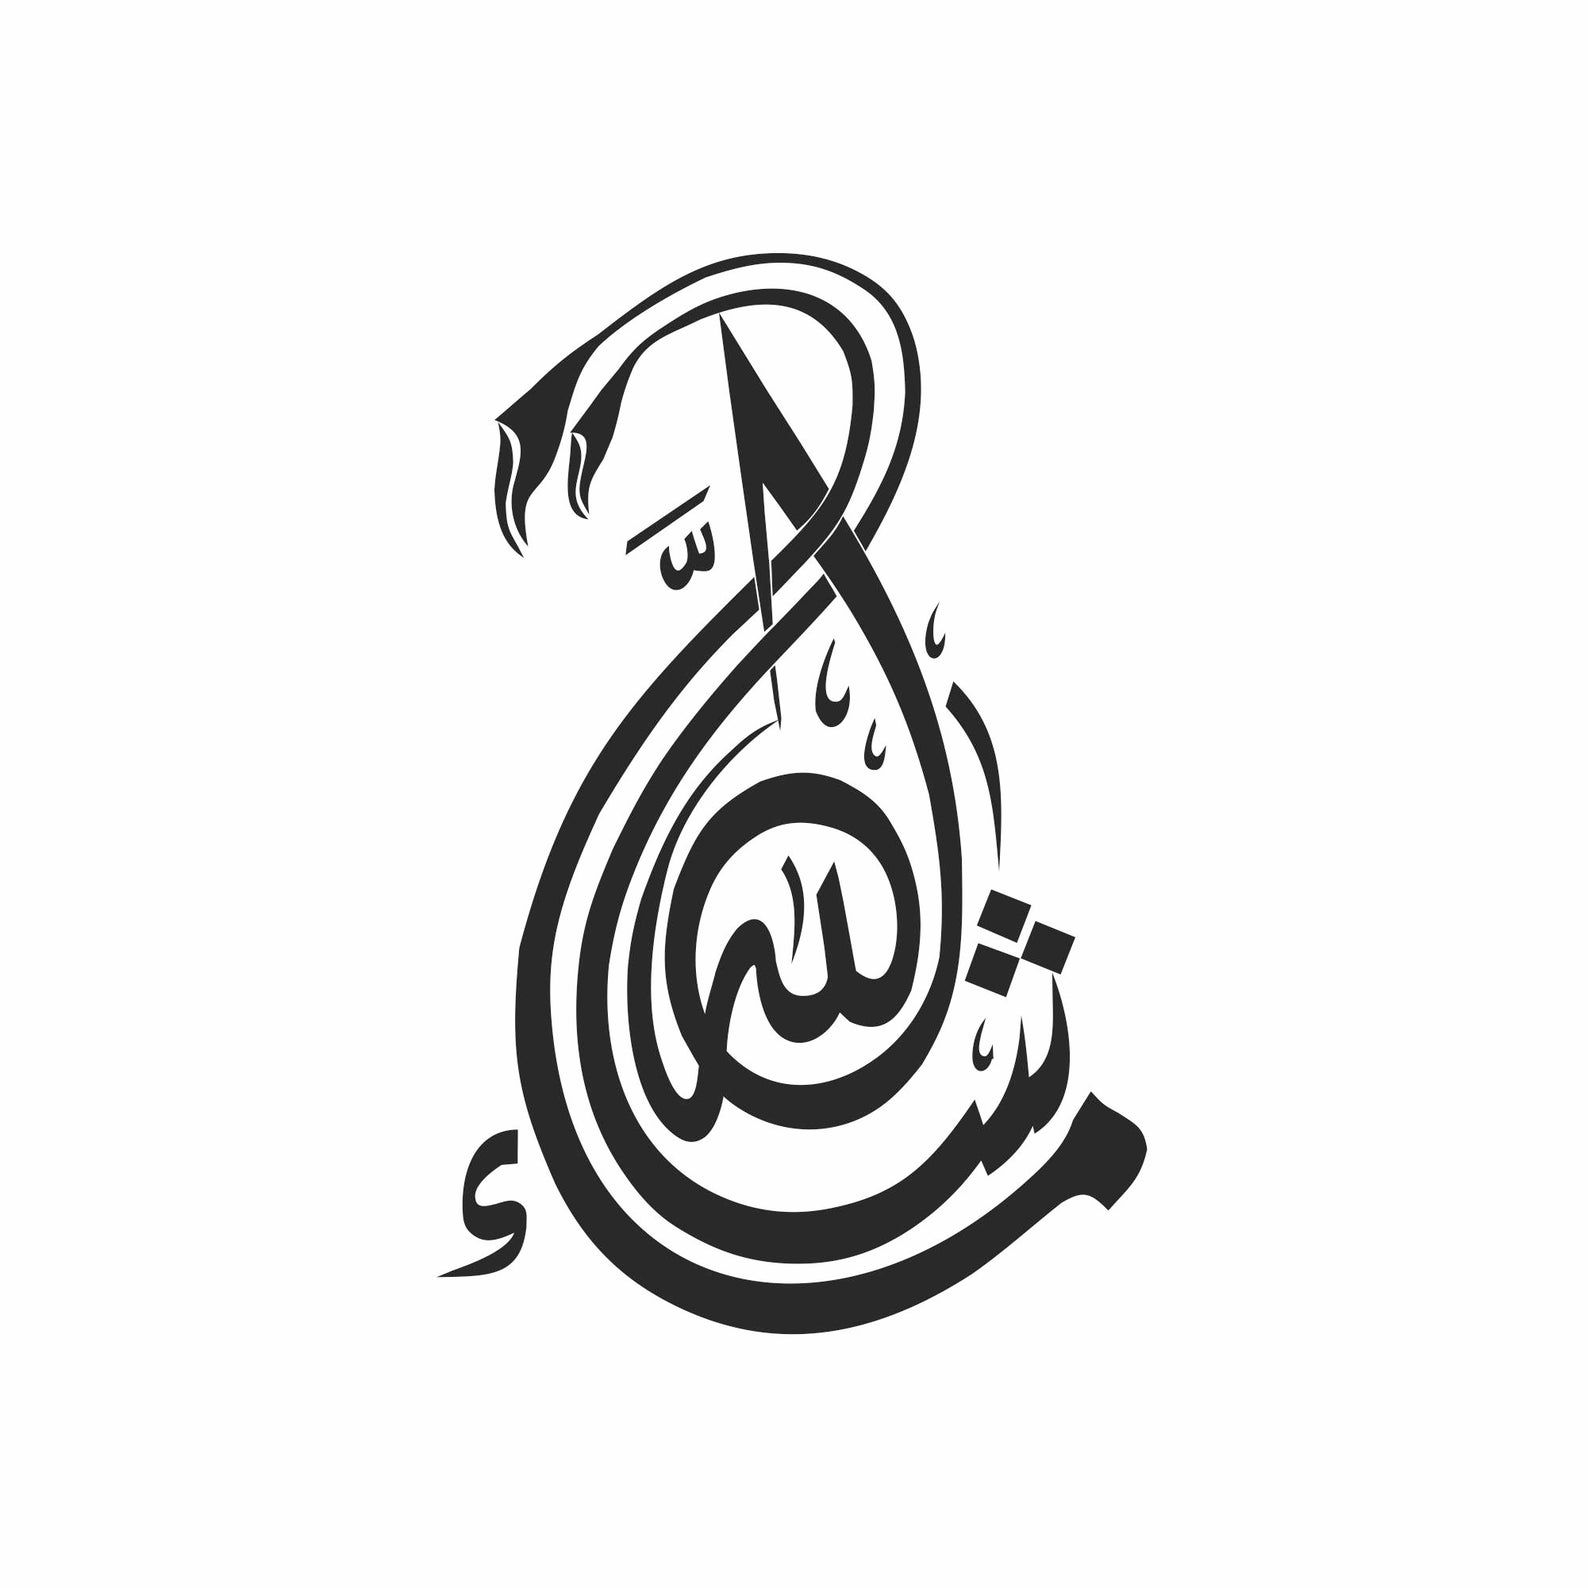 Artistic Mashallah In Arabic Calligraphy Svg File For Download To Use